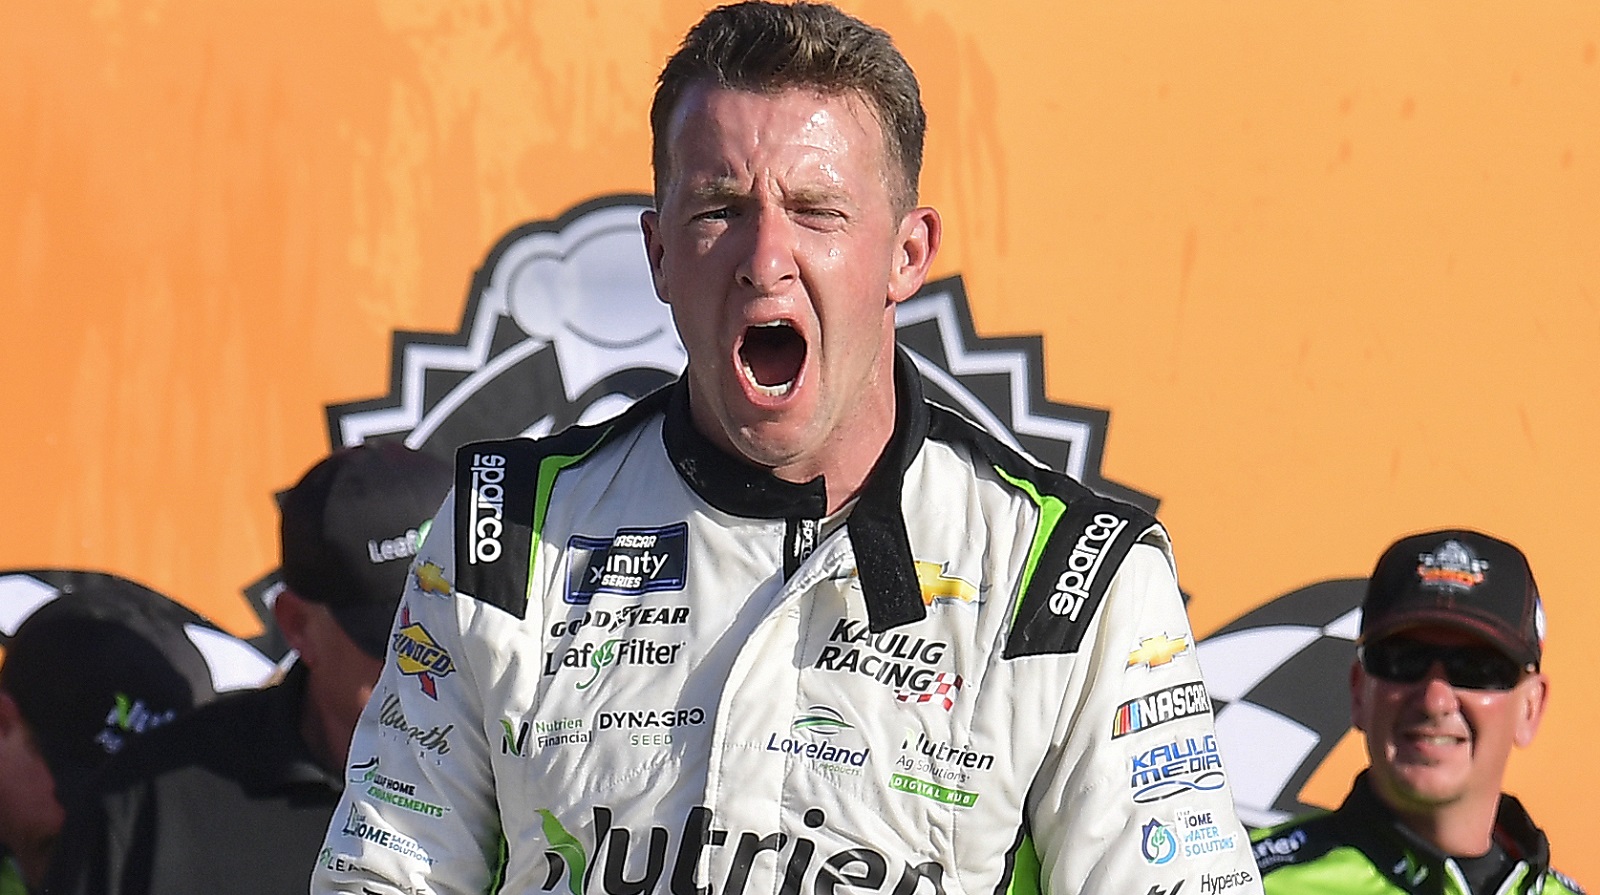 AJ Allmendinger celebrates in Victory Lane after winning the NASCAR Xfinity Series Pit Boss 250 at Circuit of The Americas on March 26, 2022. | Logan Riely/Getty Images